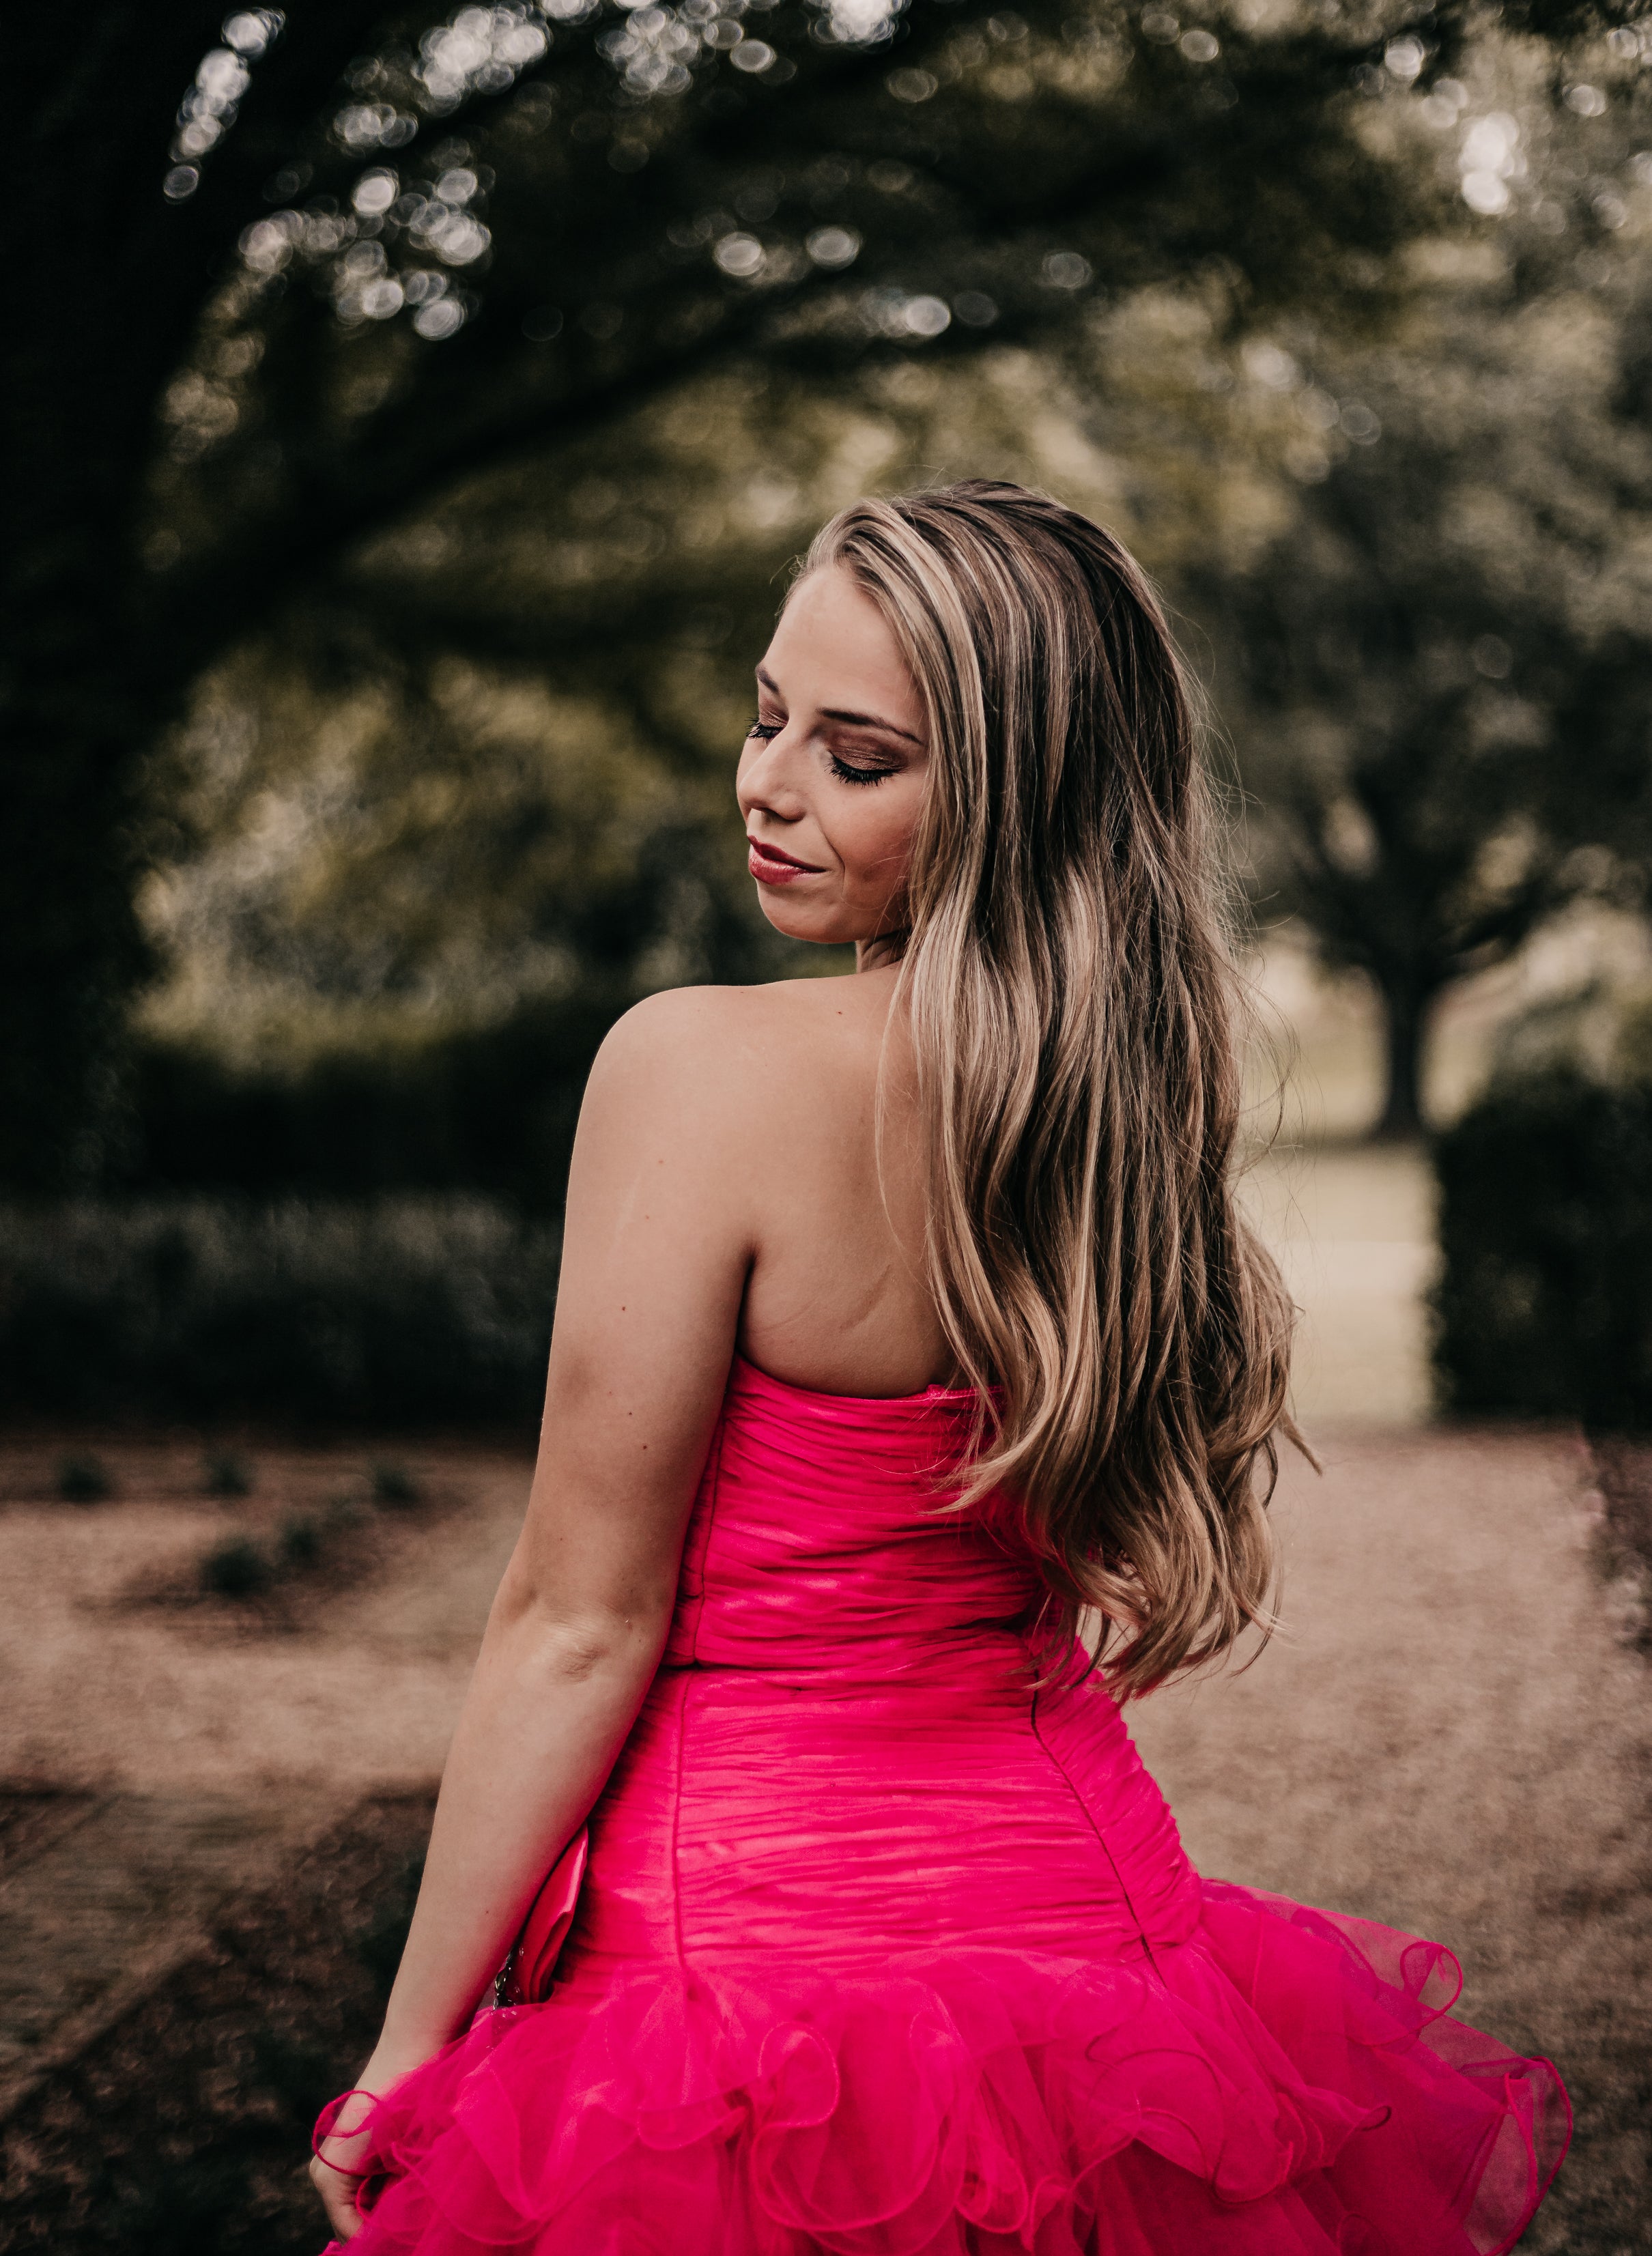 Bright Pink Strapless Cocktail Dress by Nina Canacci 707